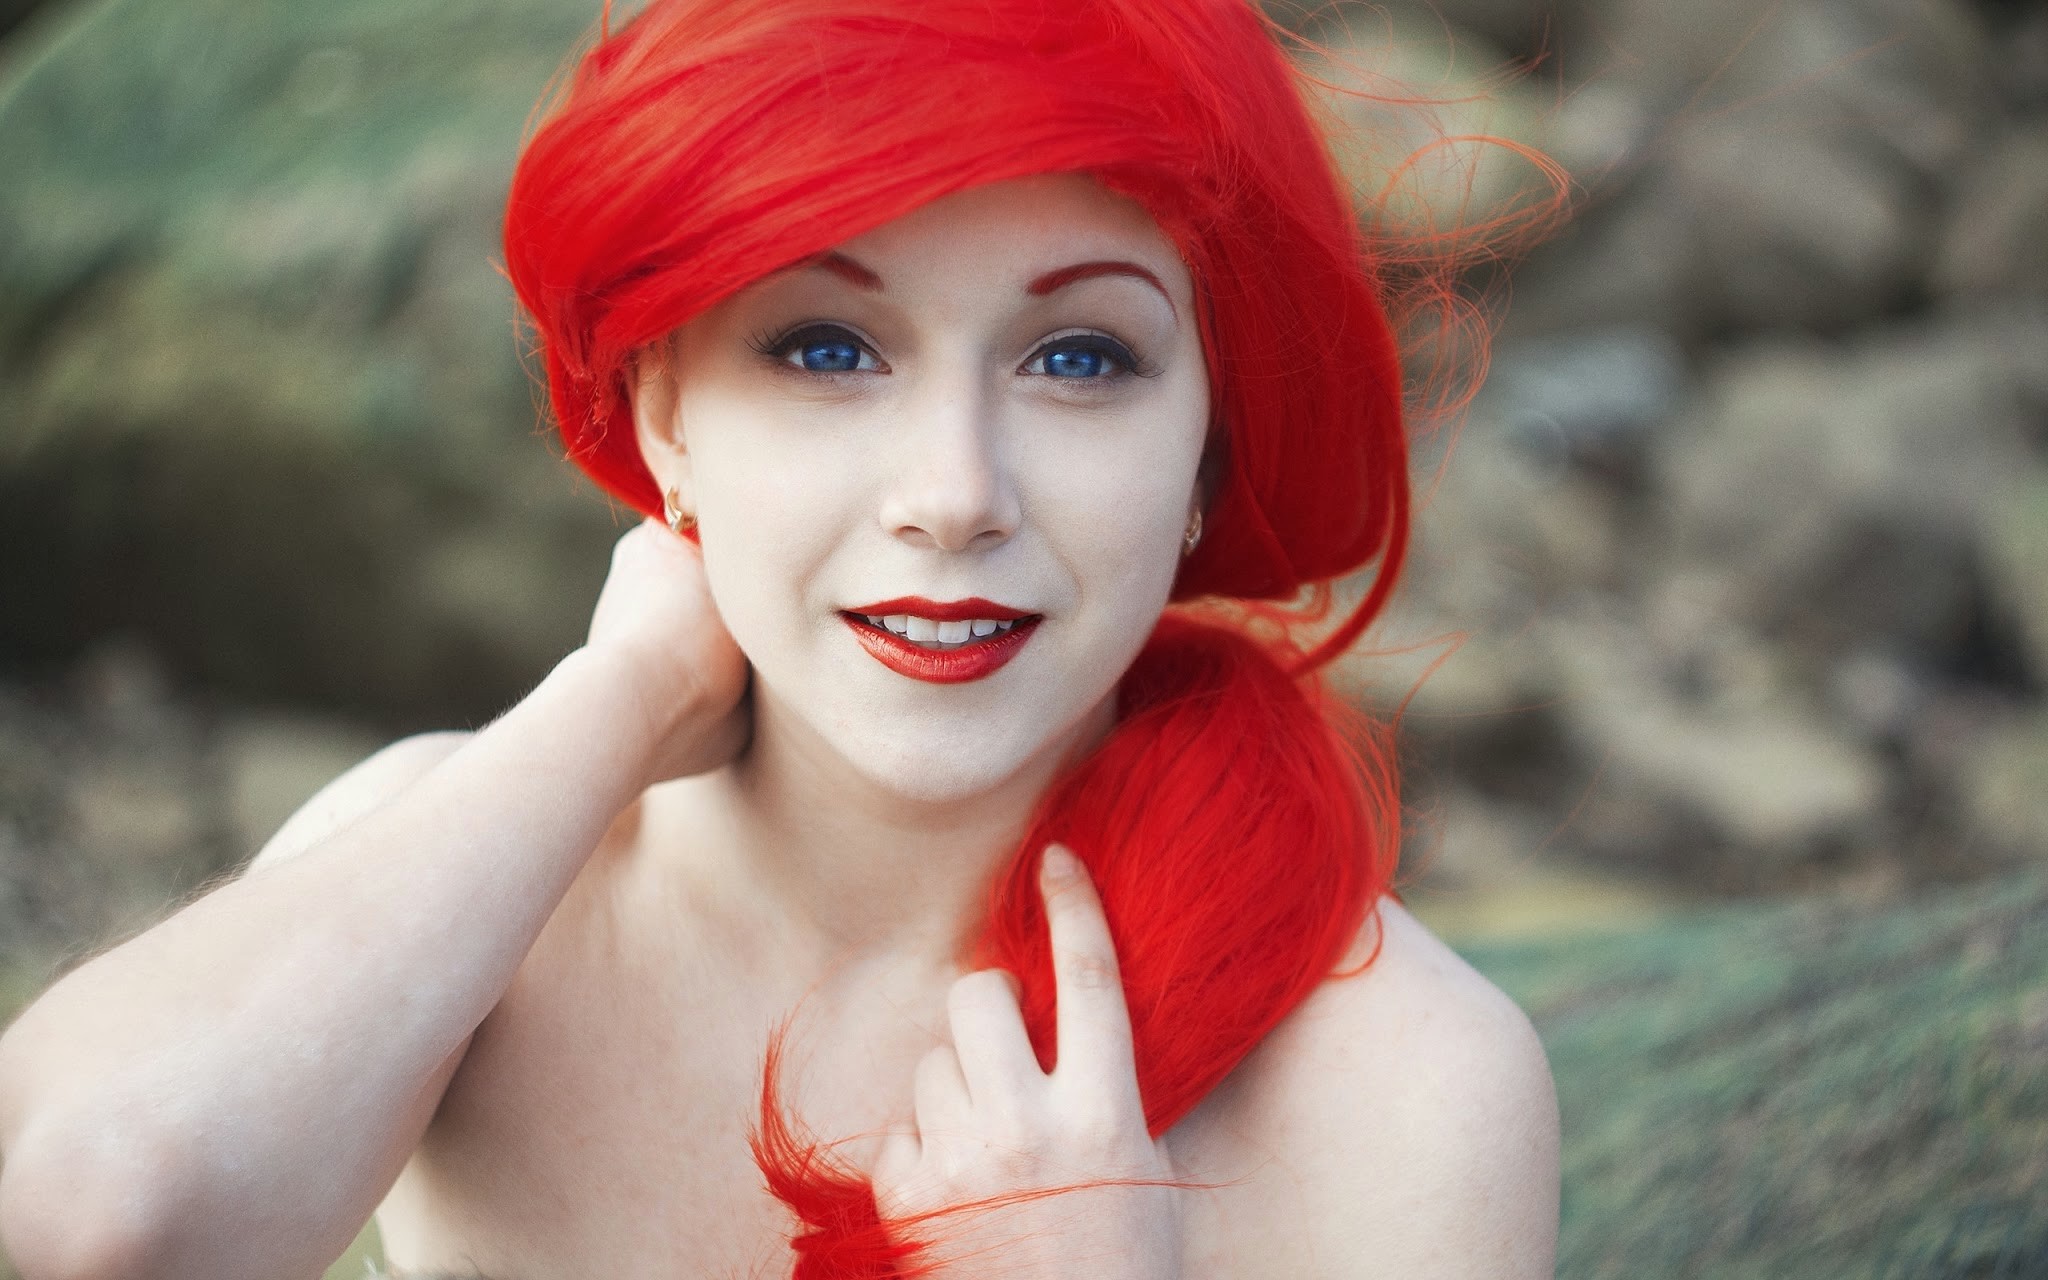 People 2048x1280 redhead pale women women outdoors red lipstick outdoors bare shoulders The Little Mermaid Disney princesses cosplay makeup blue eyes